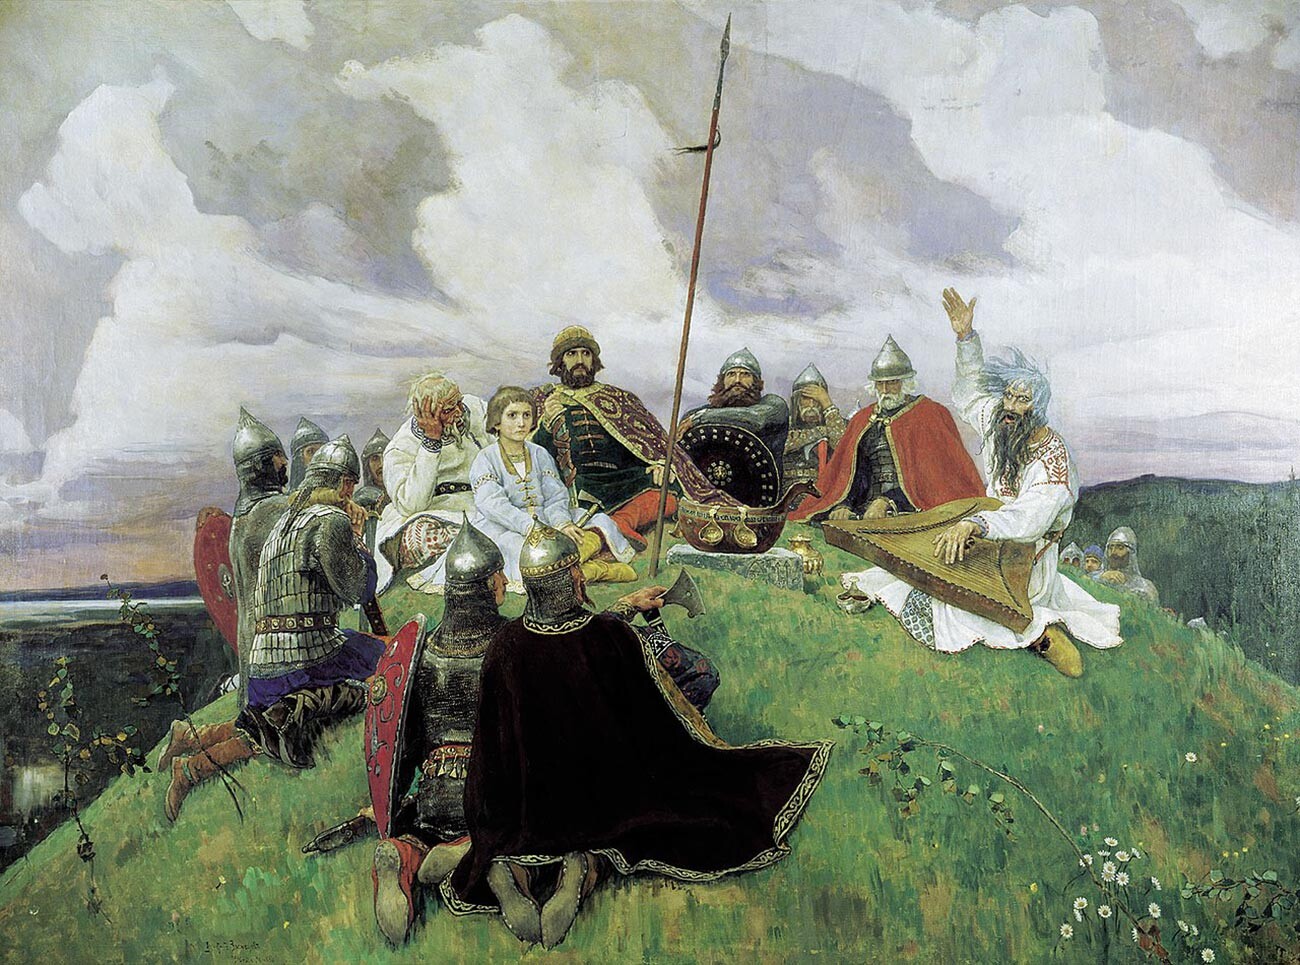 Bayan. Bayans in ancient Russia were called storytellers.